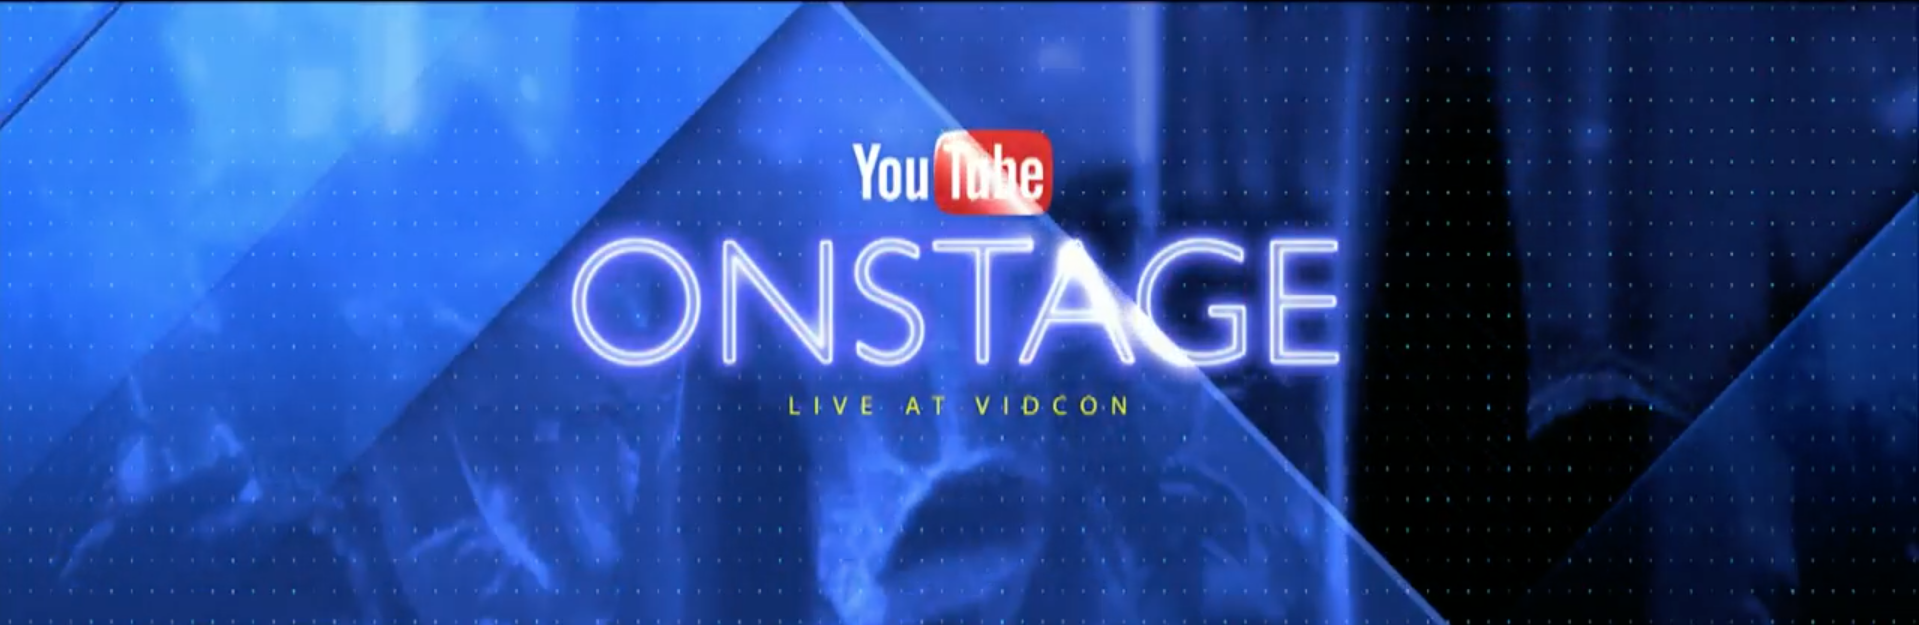 VidCon 2017 live stream featuring YouTube OnStage. Photo by: YouTube